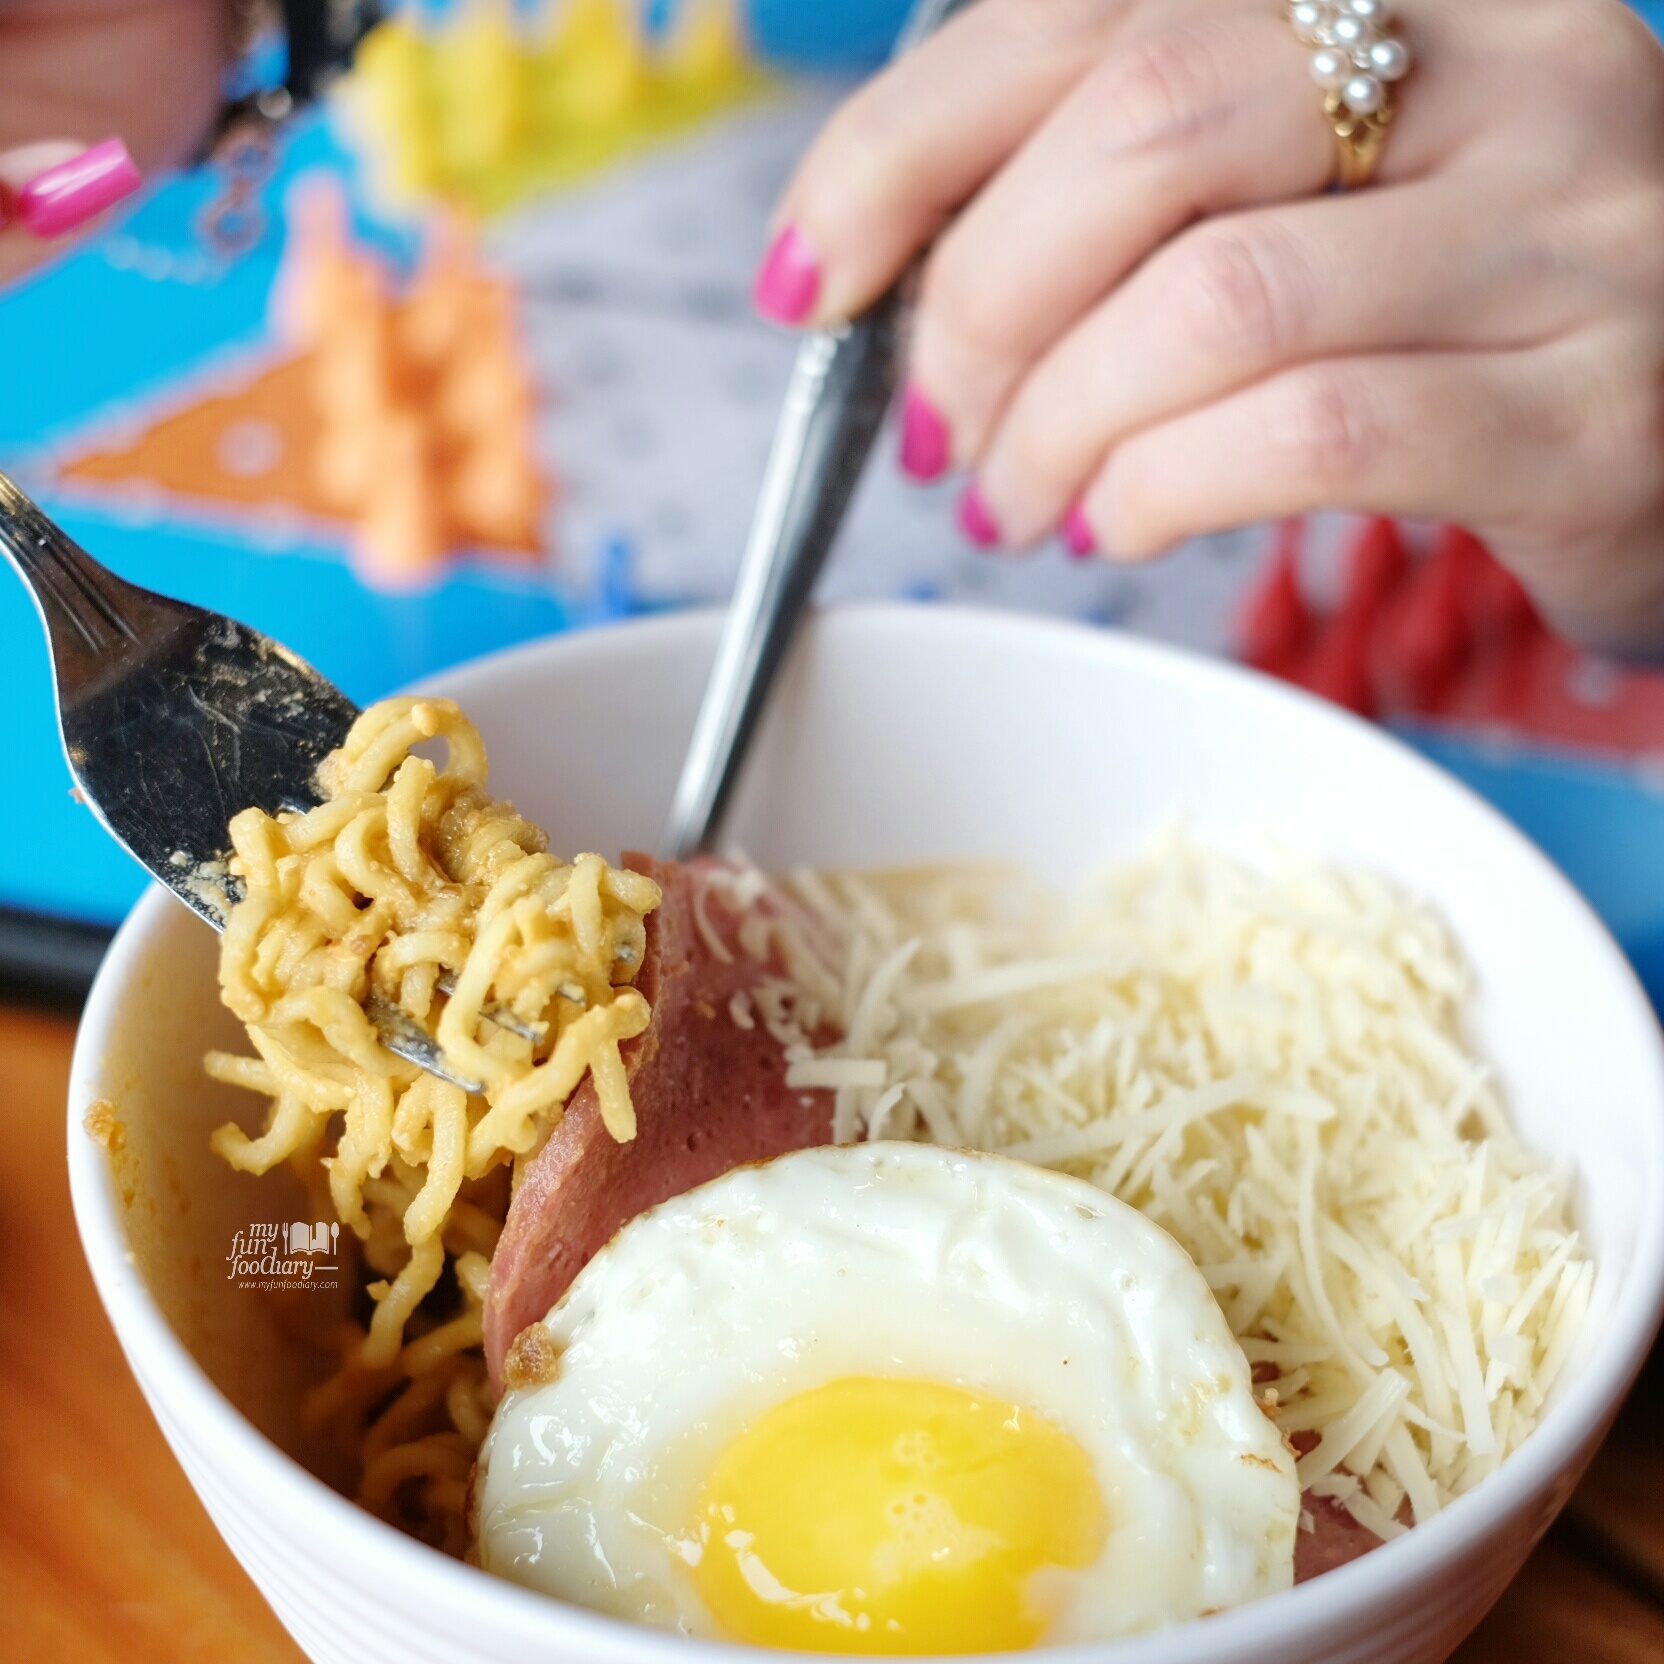 Indomie Telor Asin at Warunk Upnormal by Myfunfoodiary